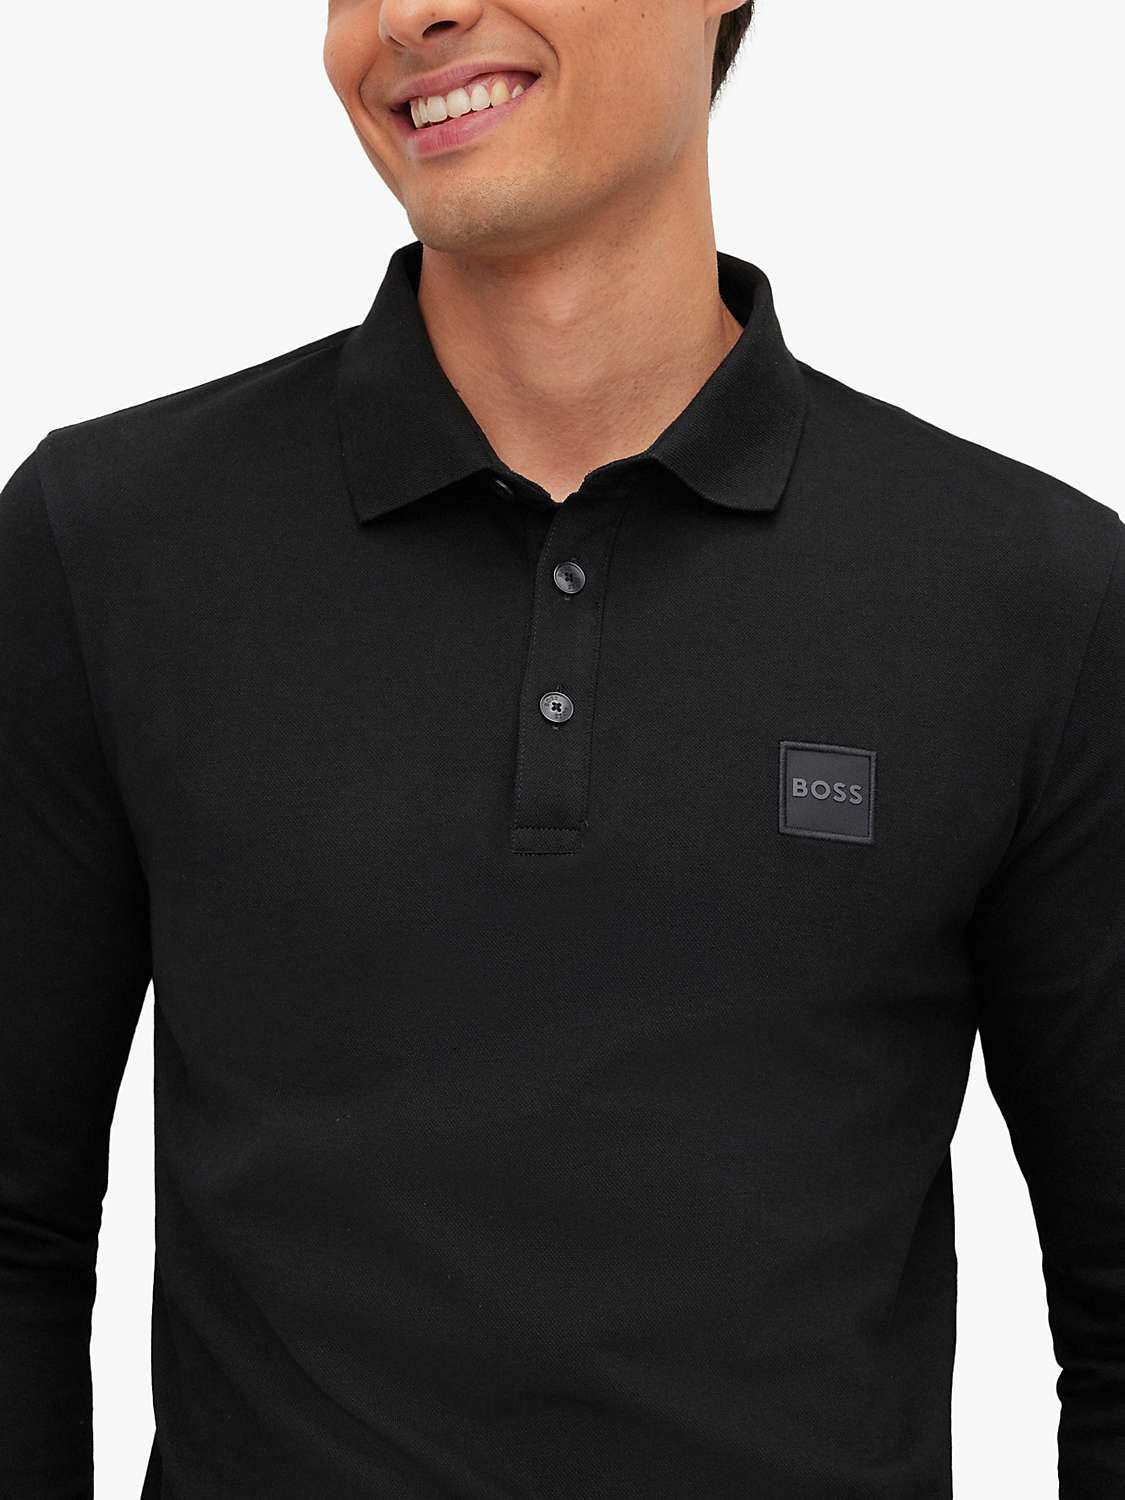 Buy BOSS Passerby Long Sleeve Polo Shirt Online at johnlewis.com